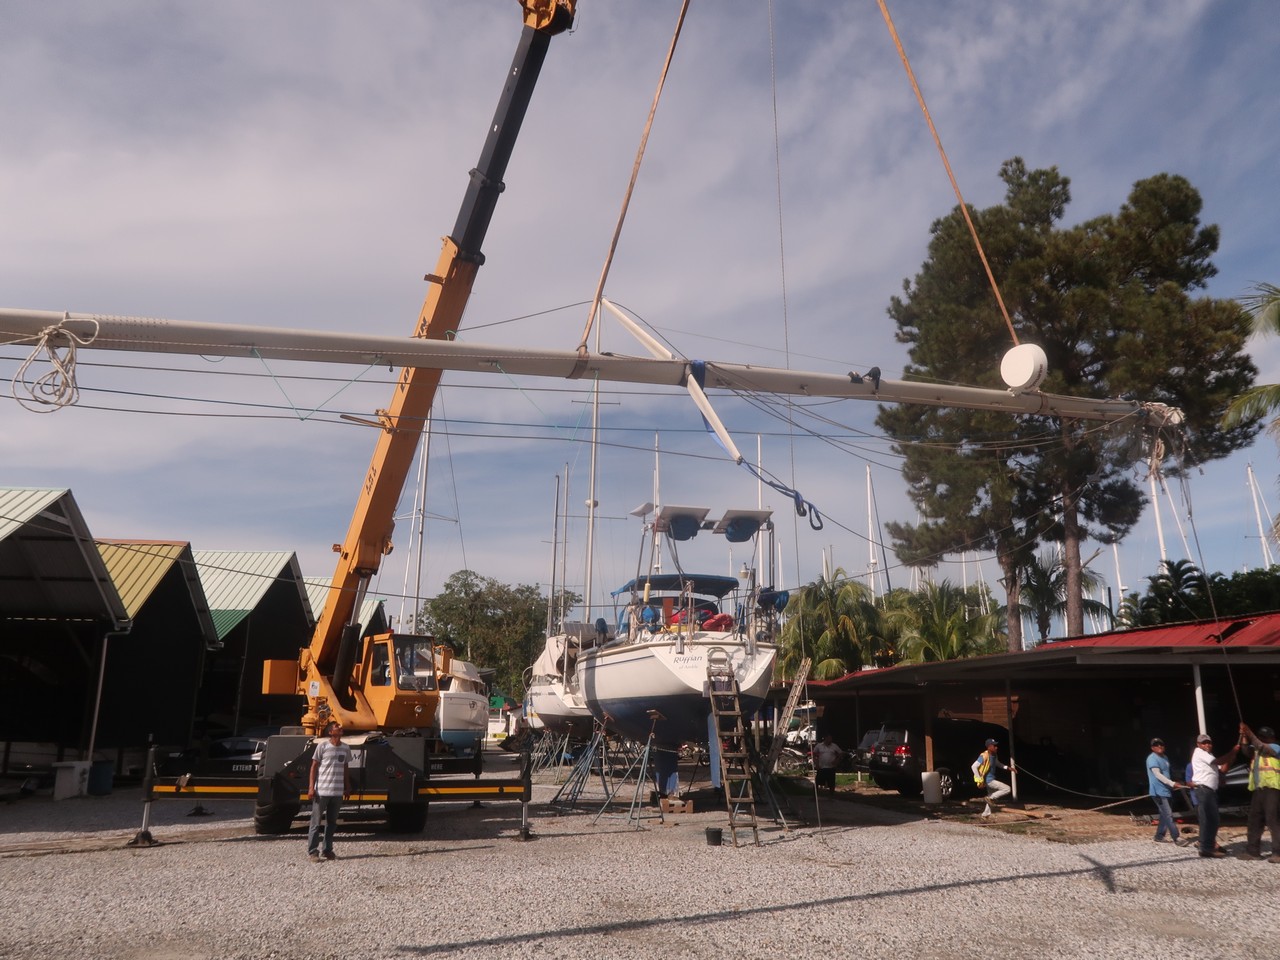 The mast finally becomes free.